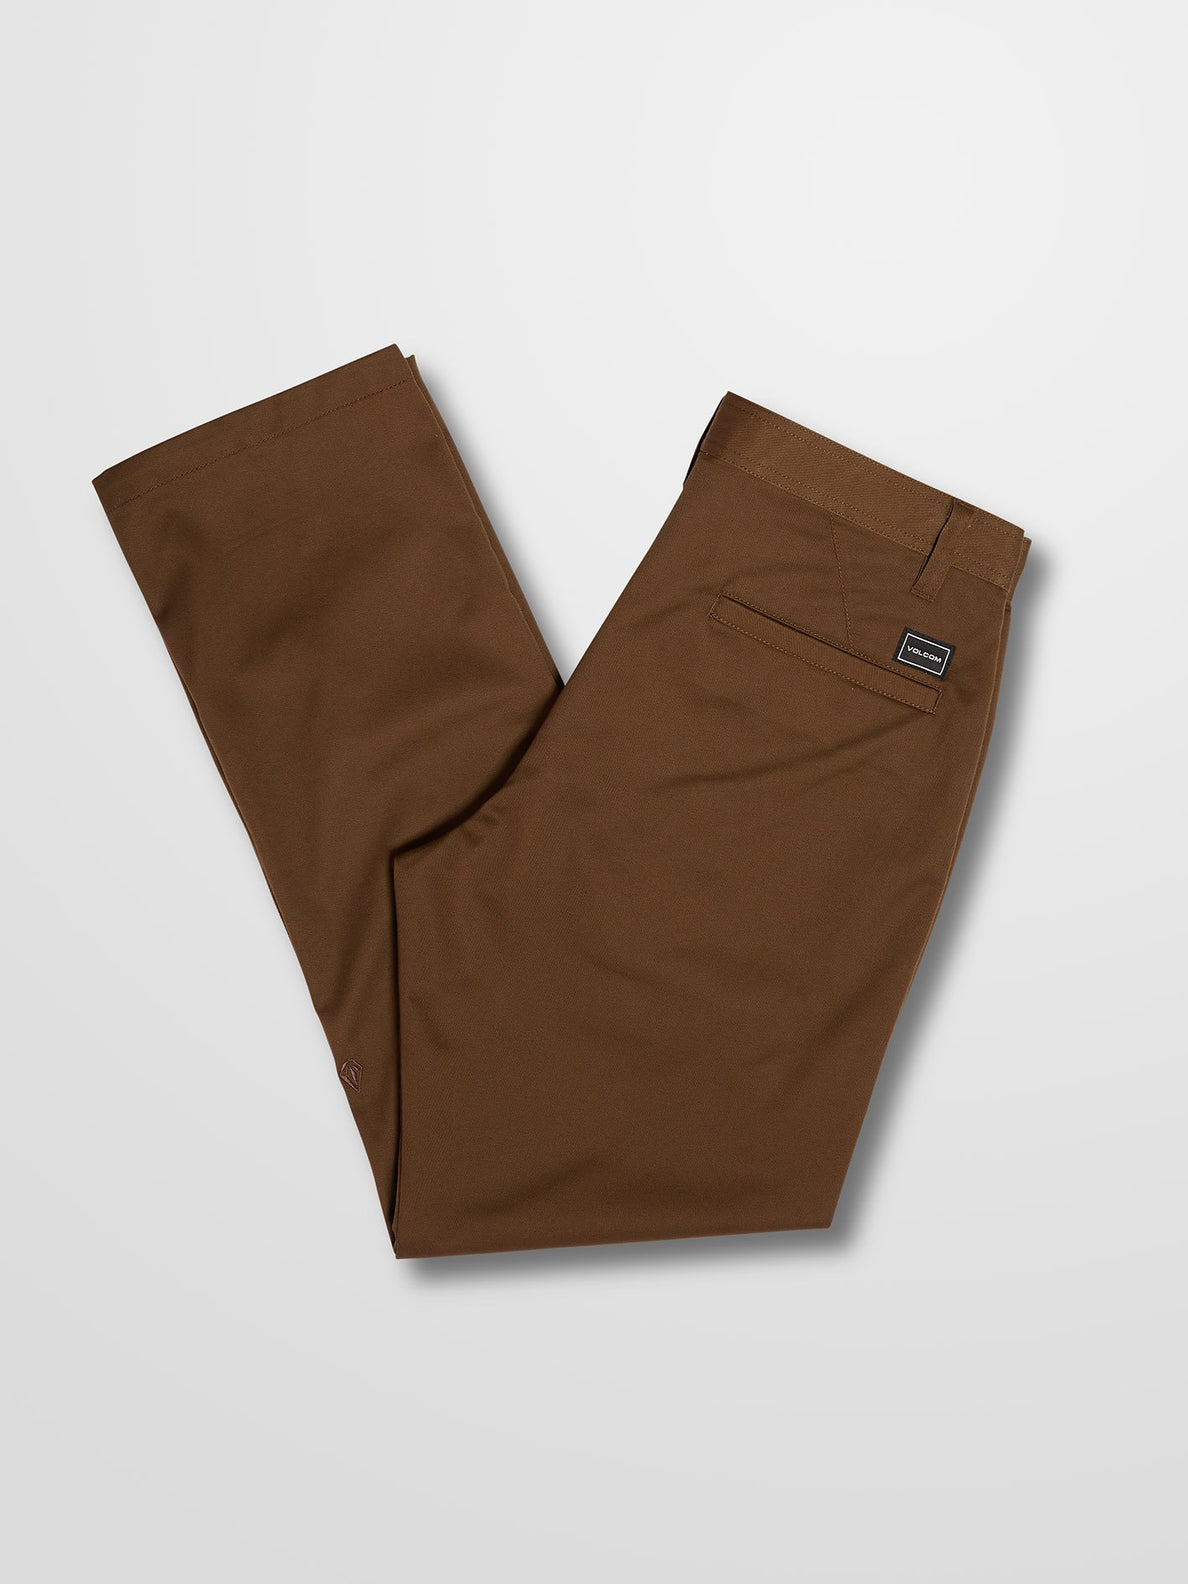 Substance Chino Pant - Vintage Brown (A1112104_VBN) [2]